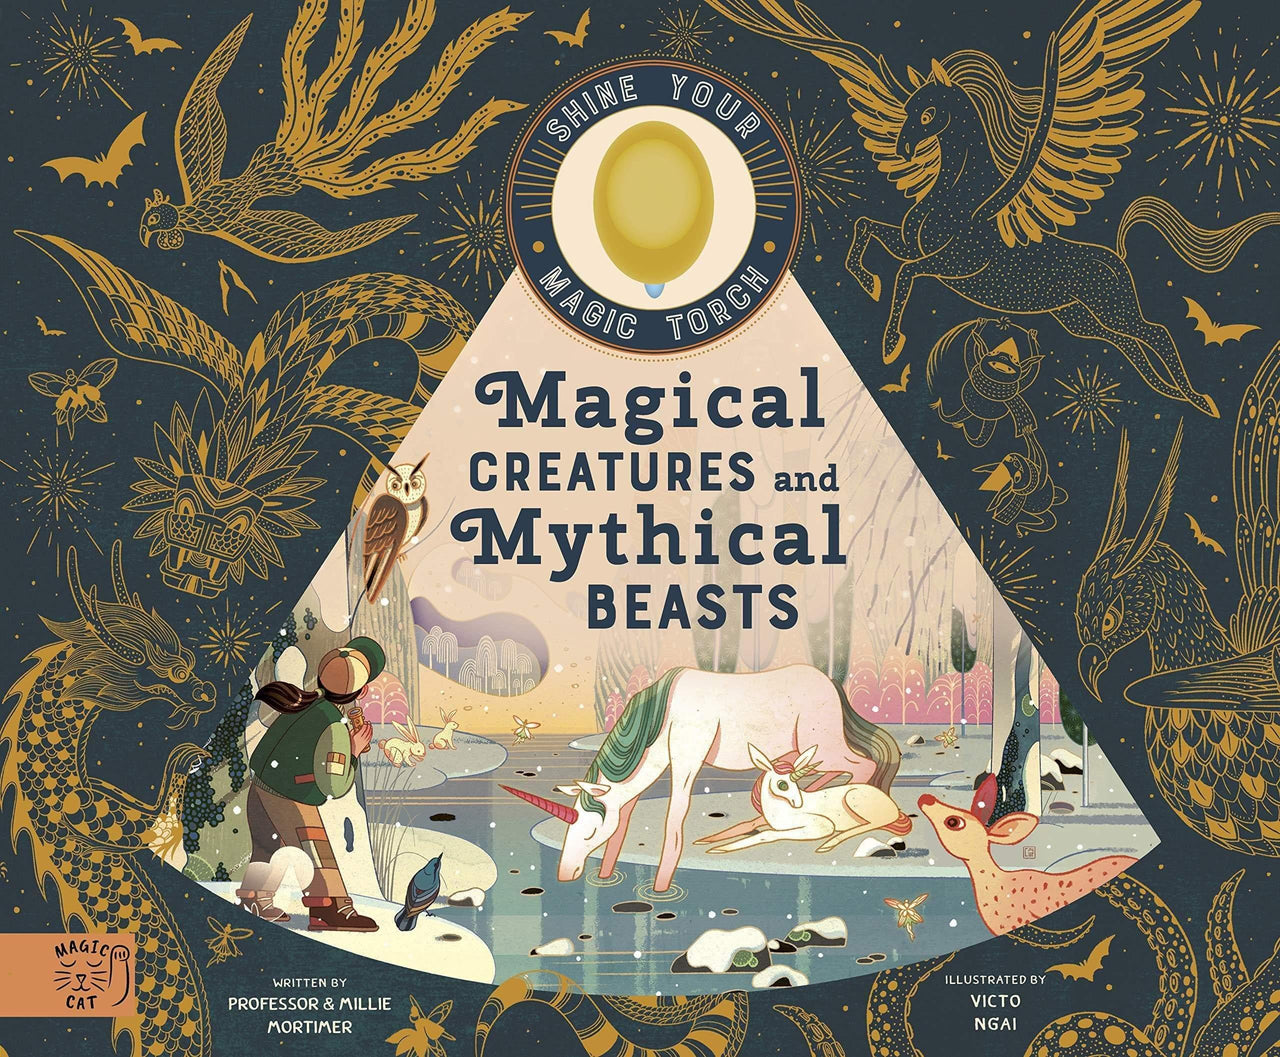 Magical Creatures & Mythical Beasts by Professor Mortimer & Emily Hawkins Wigwam Toyshop (5828113170592)